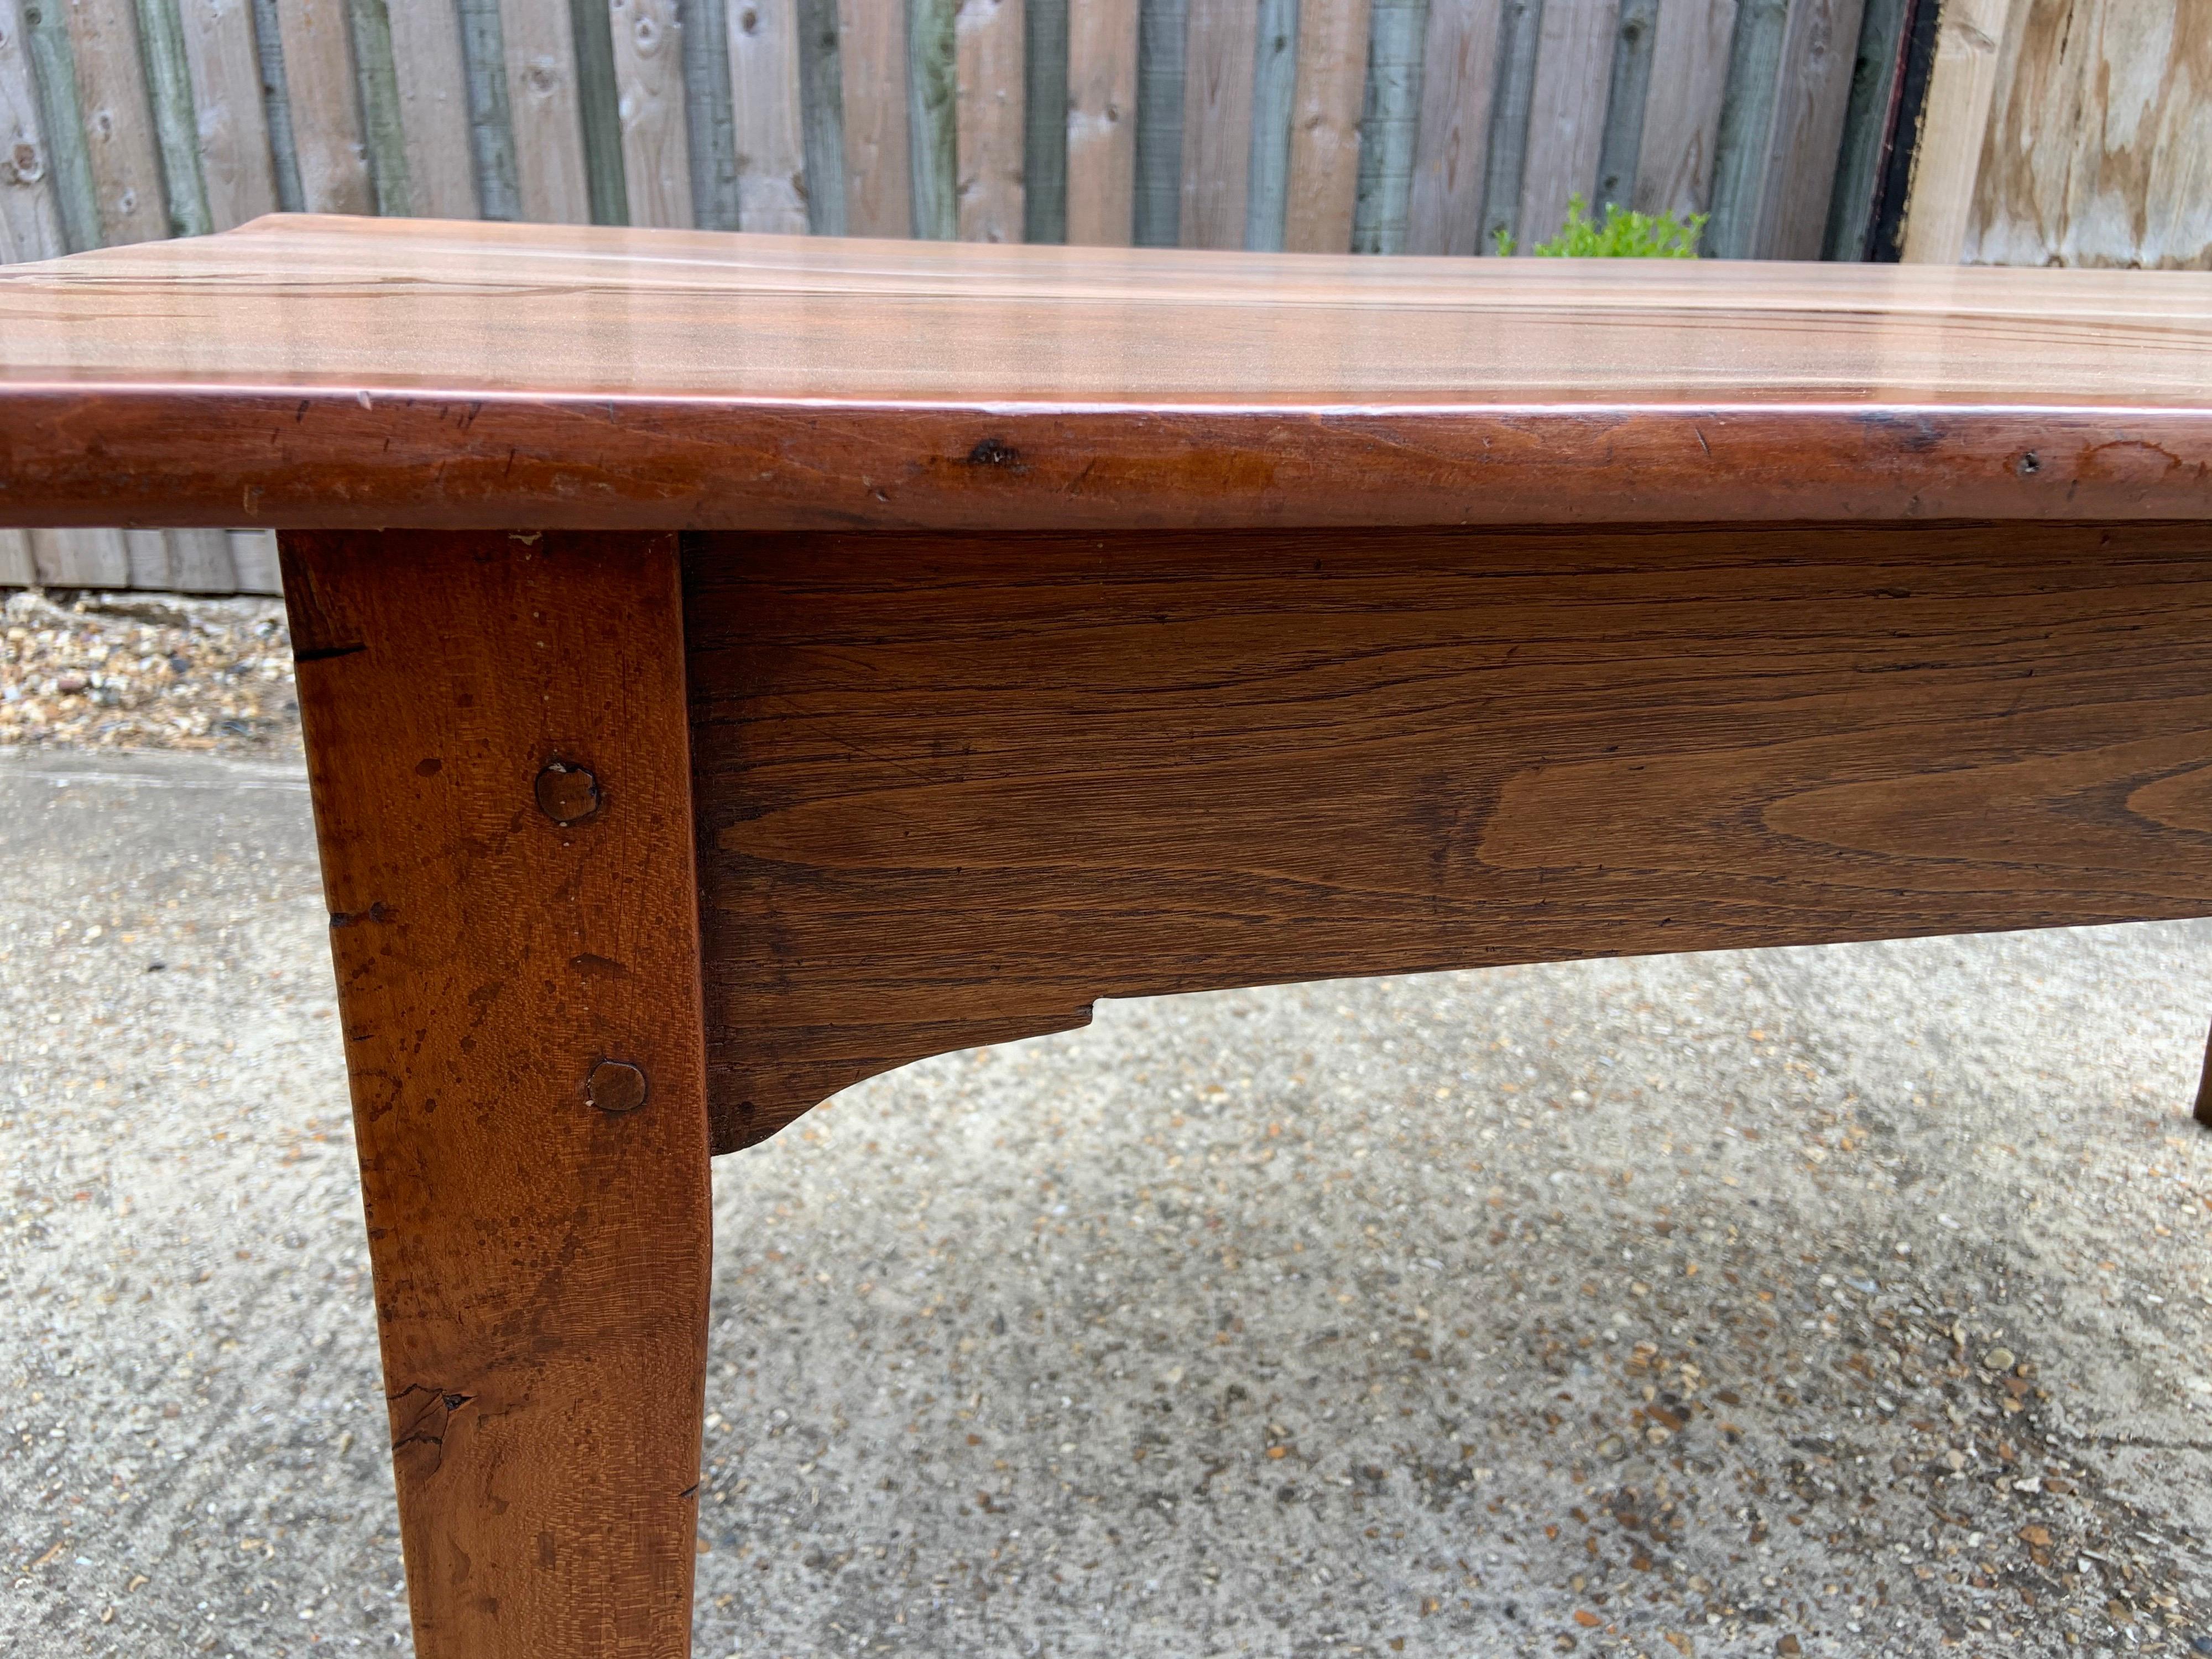 Hand-Carved Early 19th Century Wide Cherry Farmhouse Table With Slide and Tapered legs